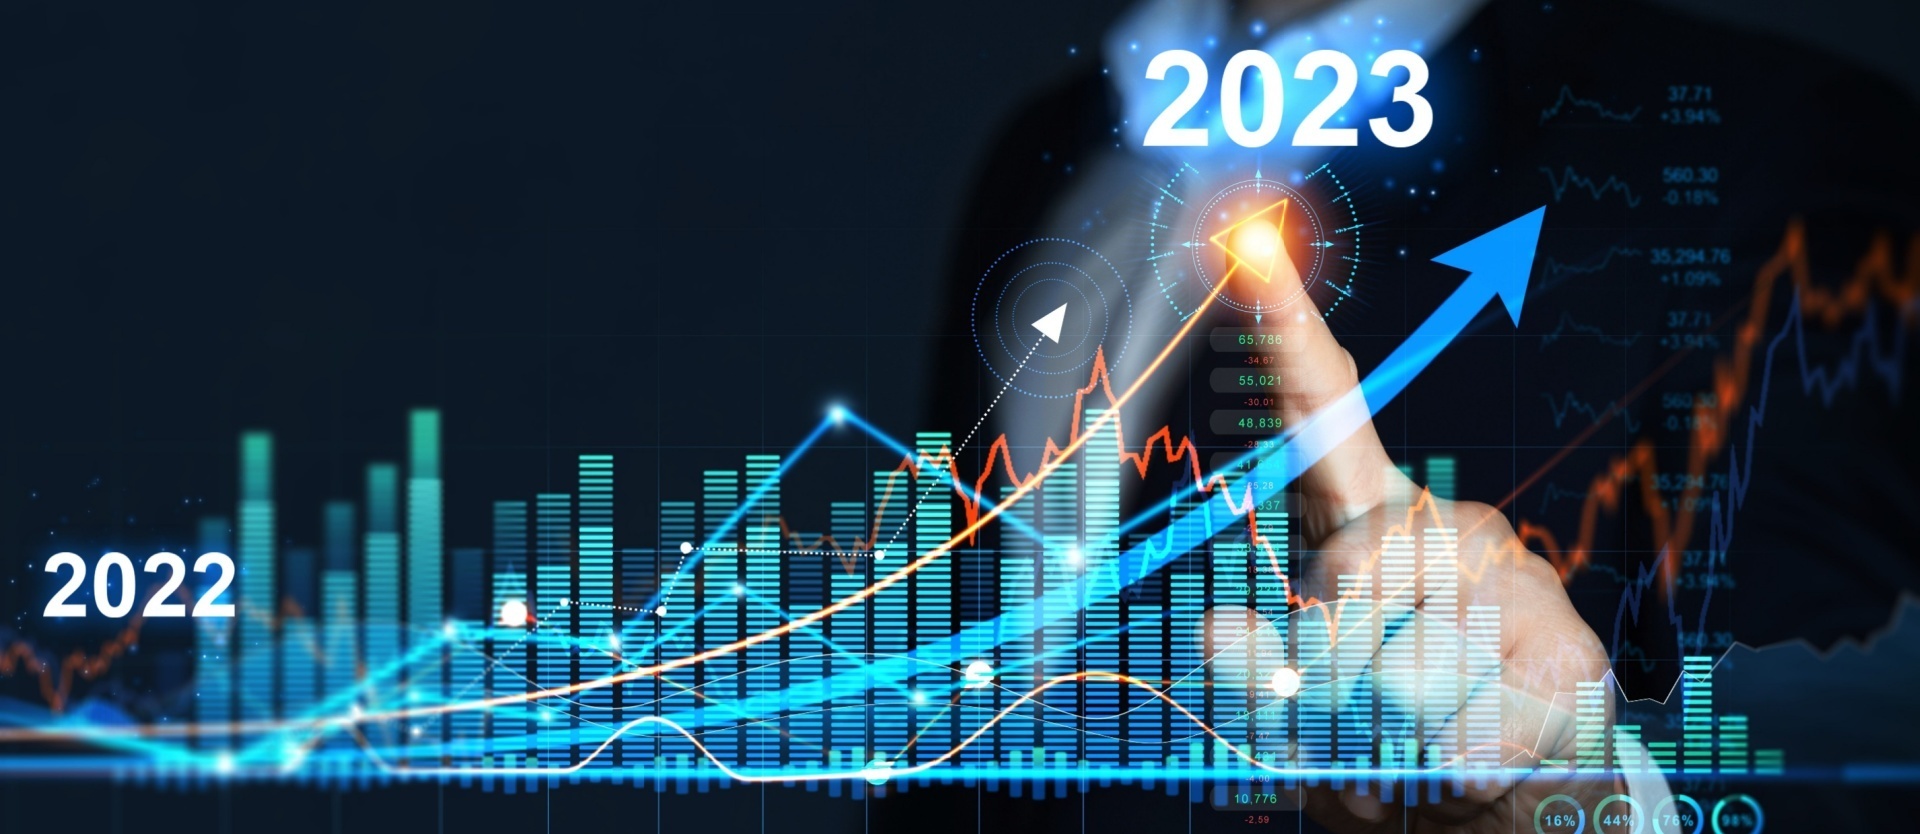 Projected Employment Trends in 2023